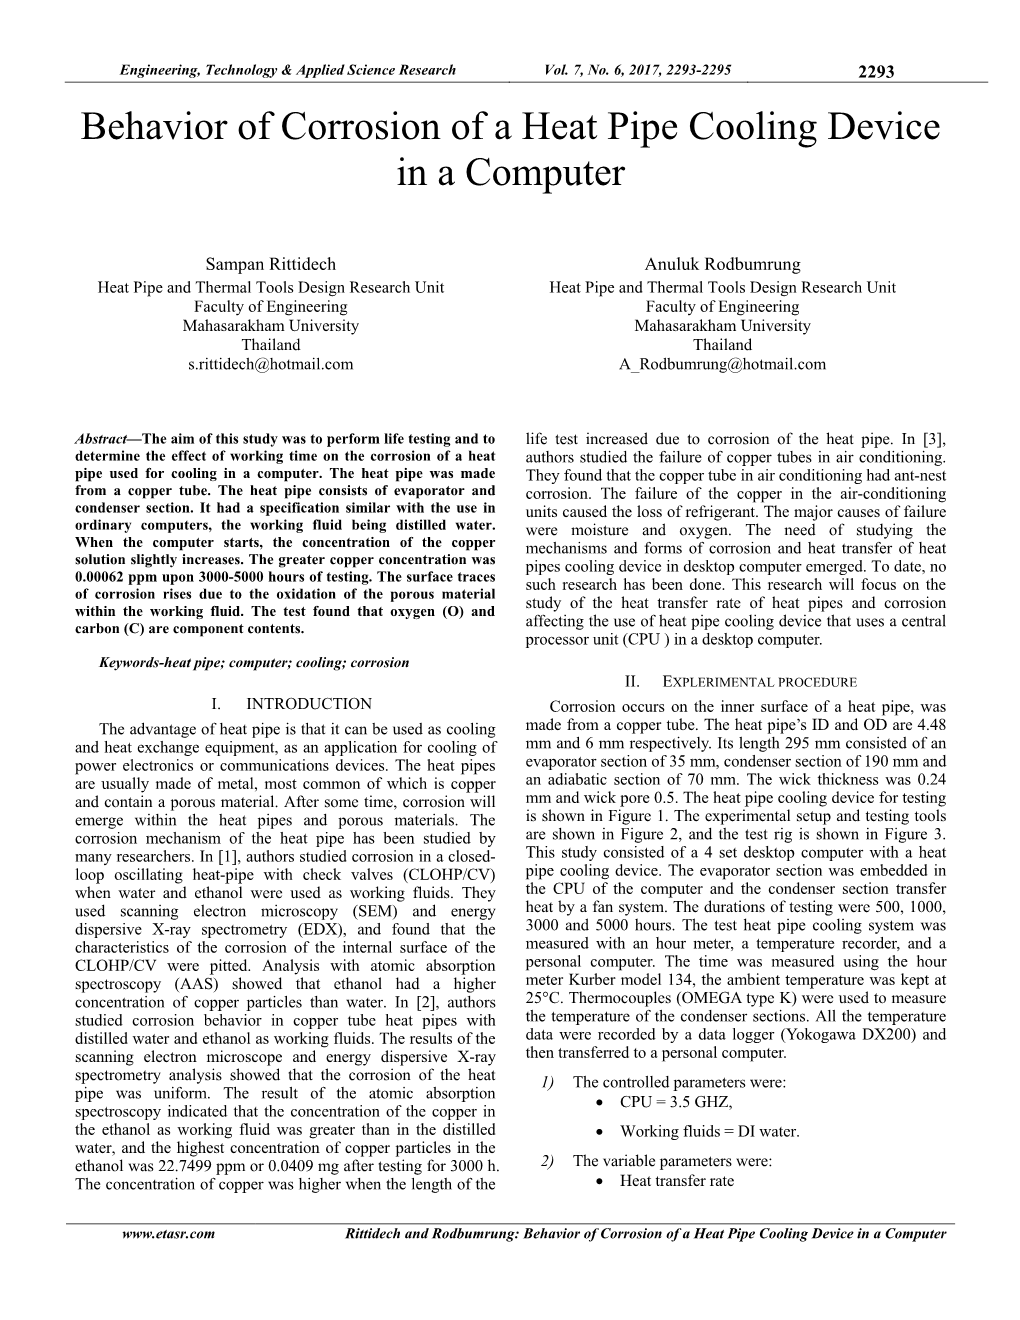 Behavior of Corrosion of a Heat Pipe Cooling Device in a Computer